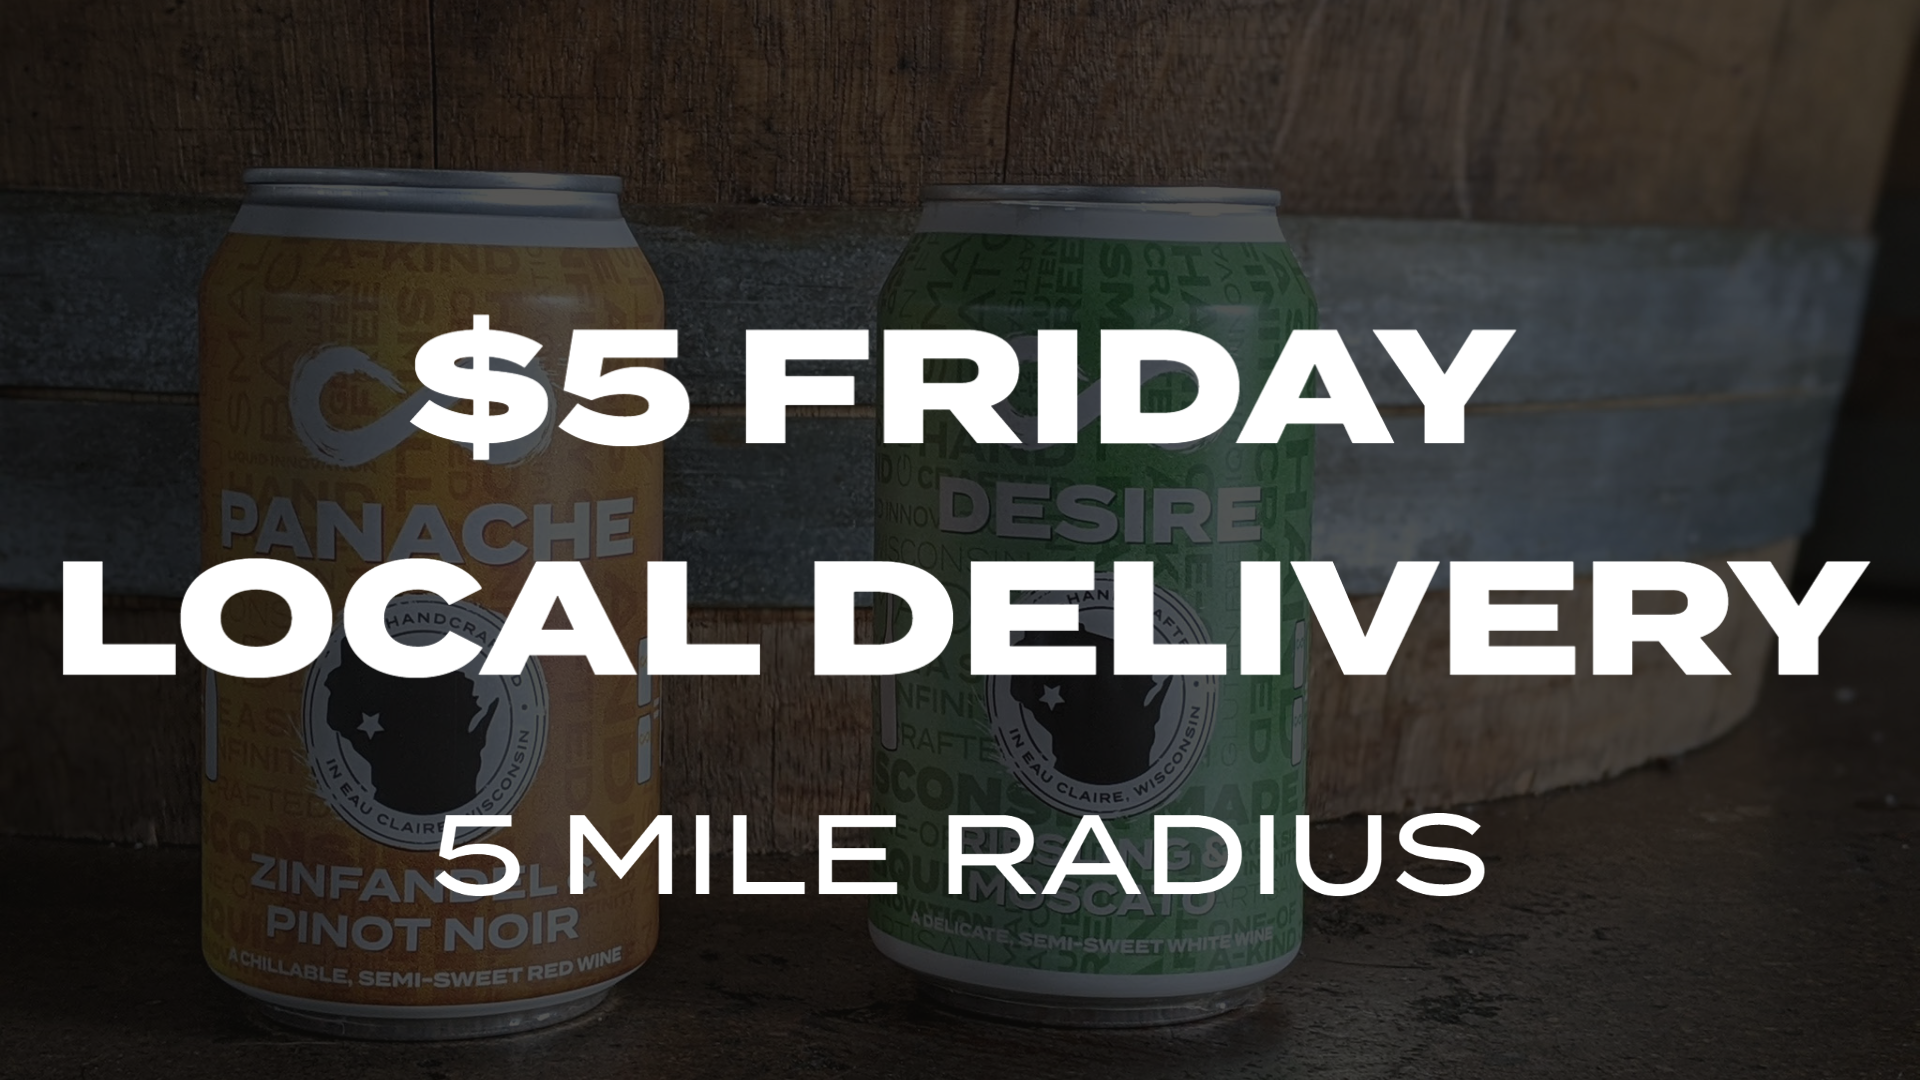 $5 FRIDAY DELIVERY